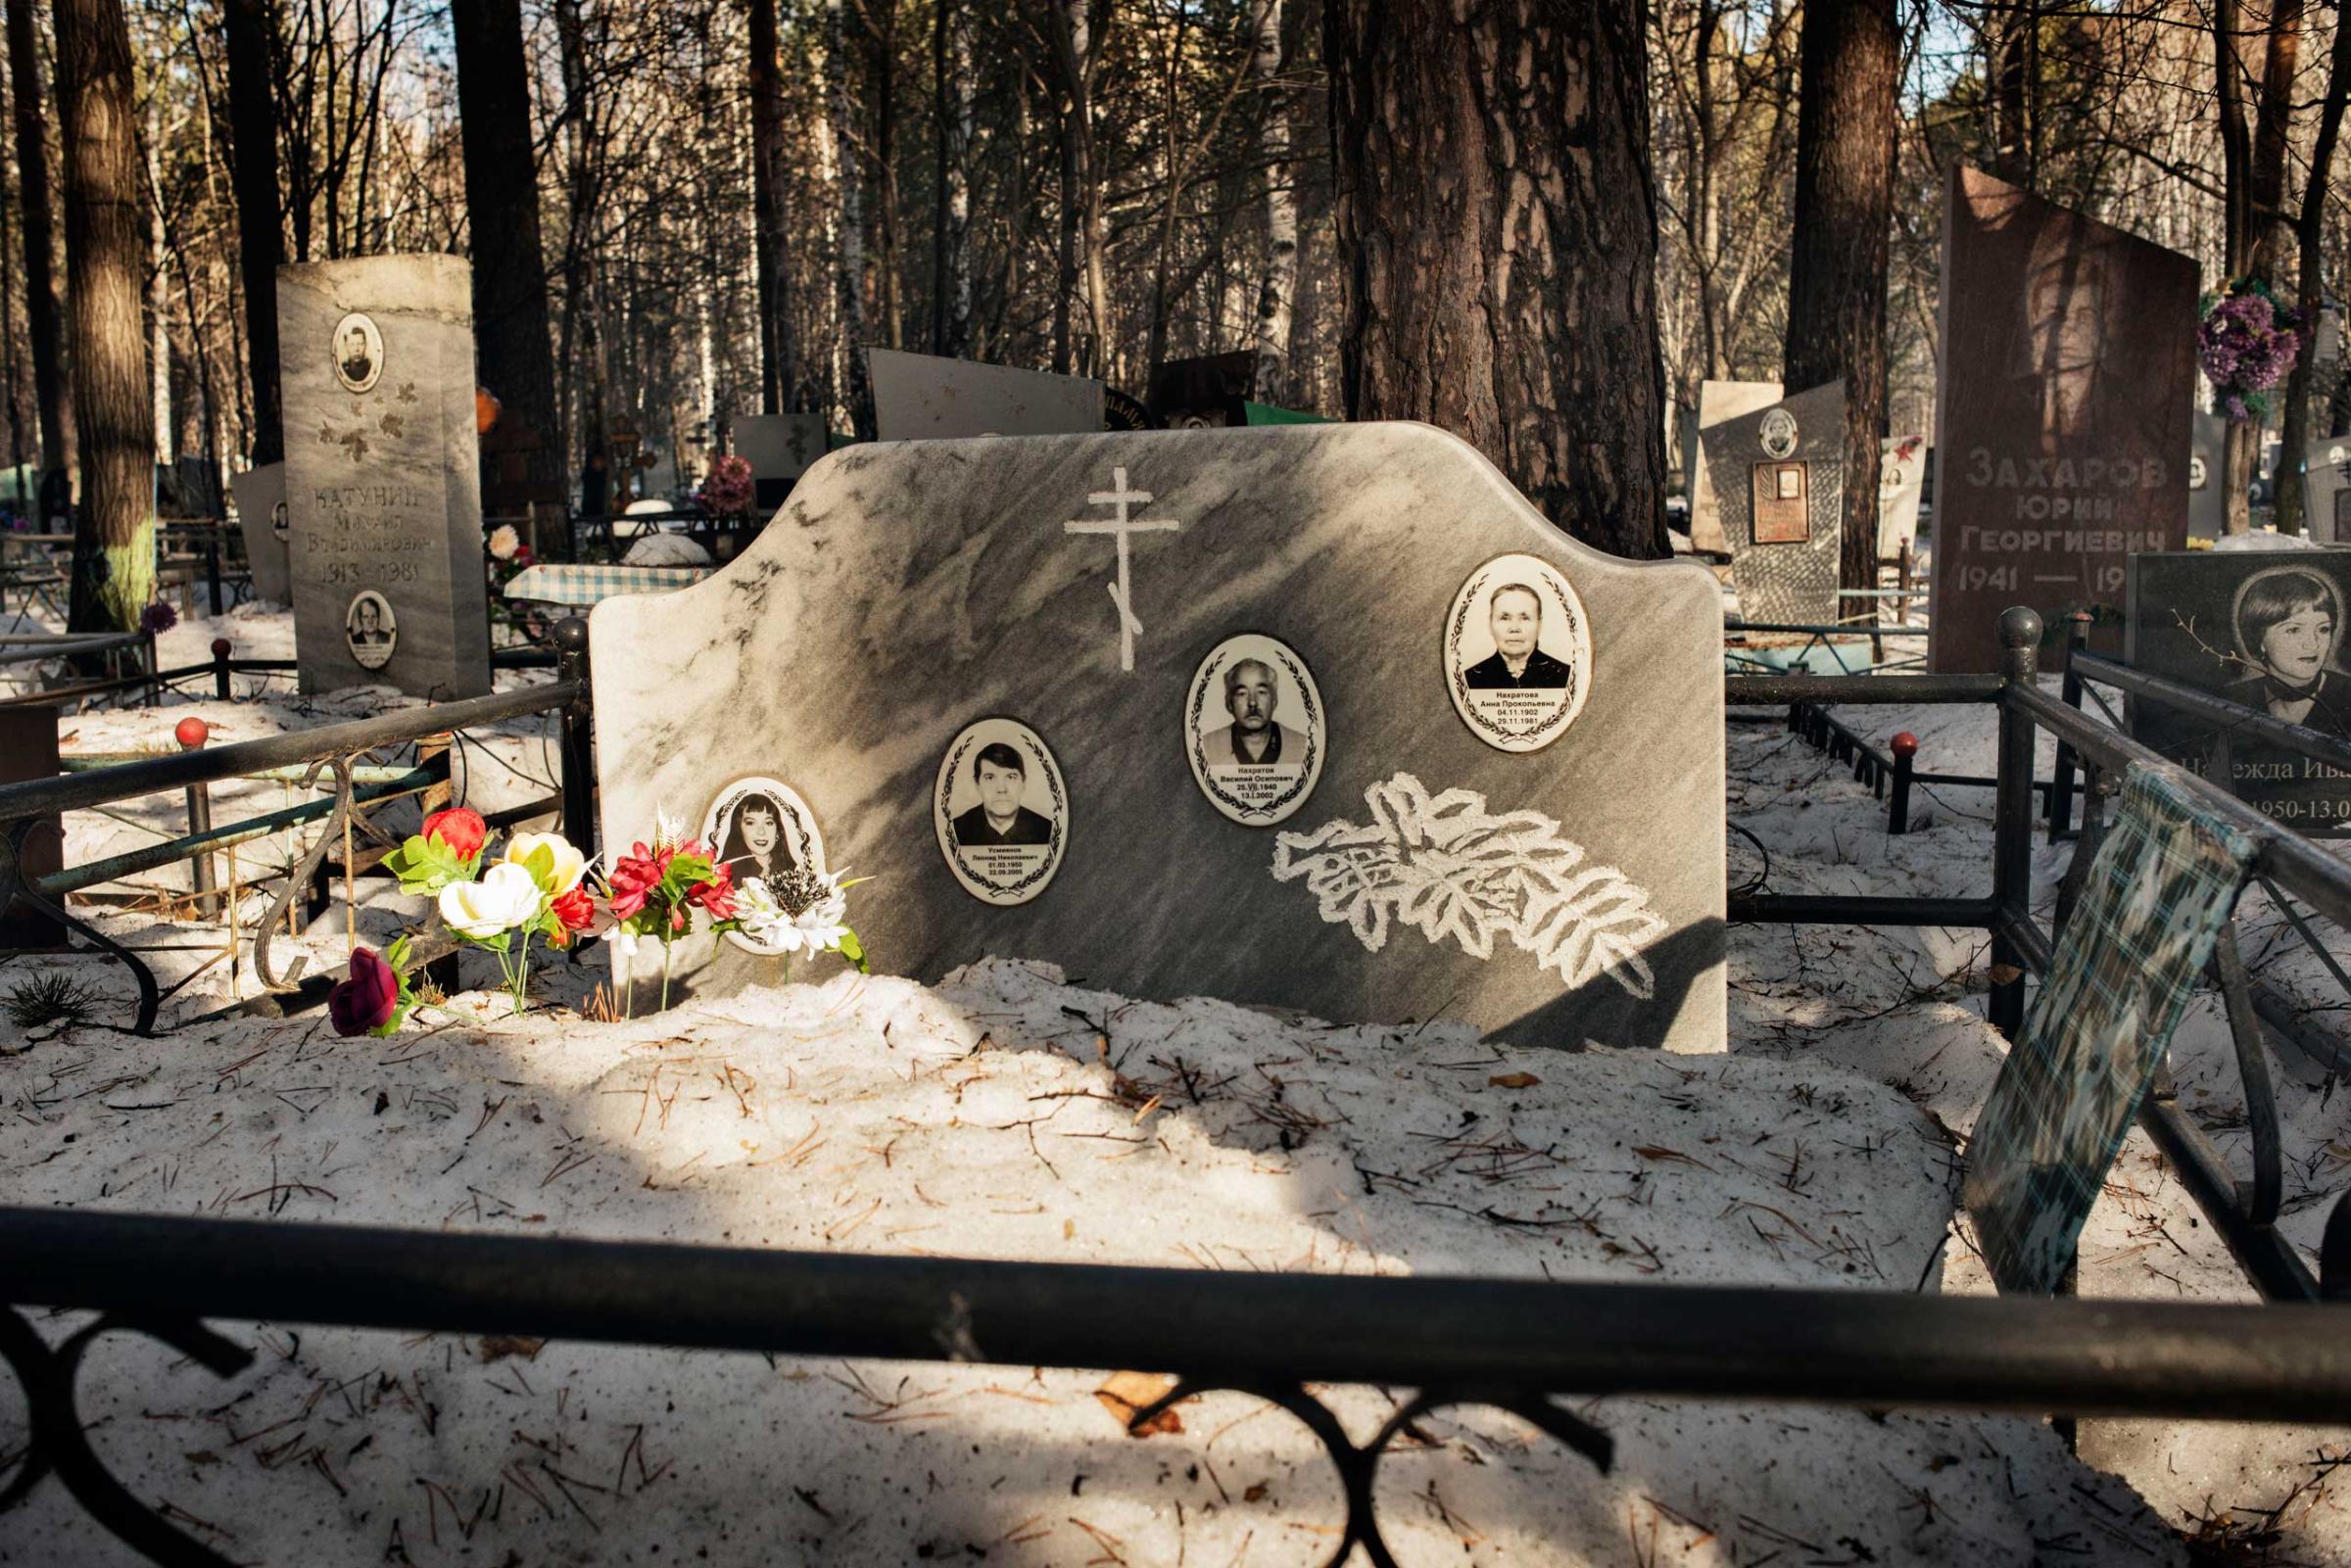 Olga is buried in a cemetery in Uralmash district next to her relatives. She died in 2015 due to her liver failure after a long use of Krokodil.